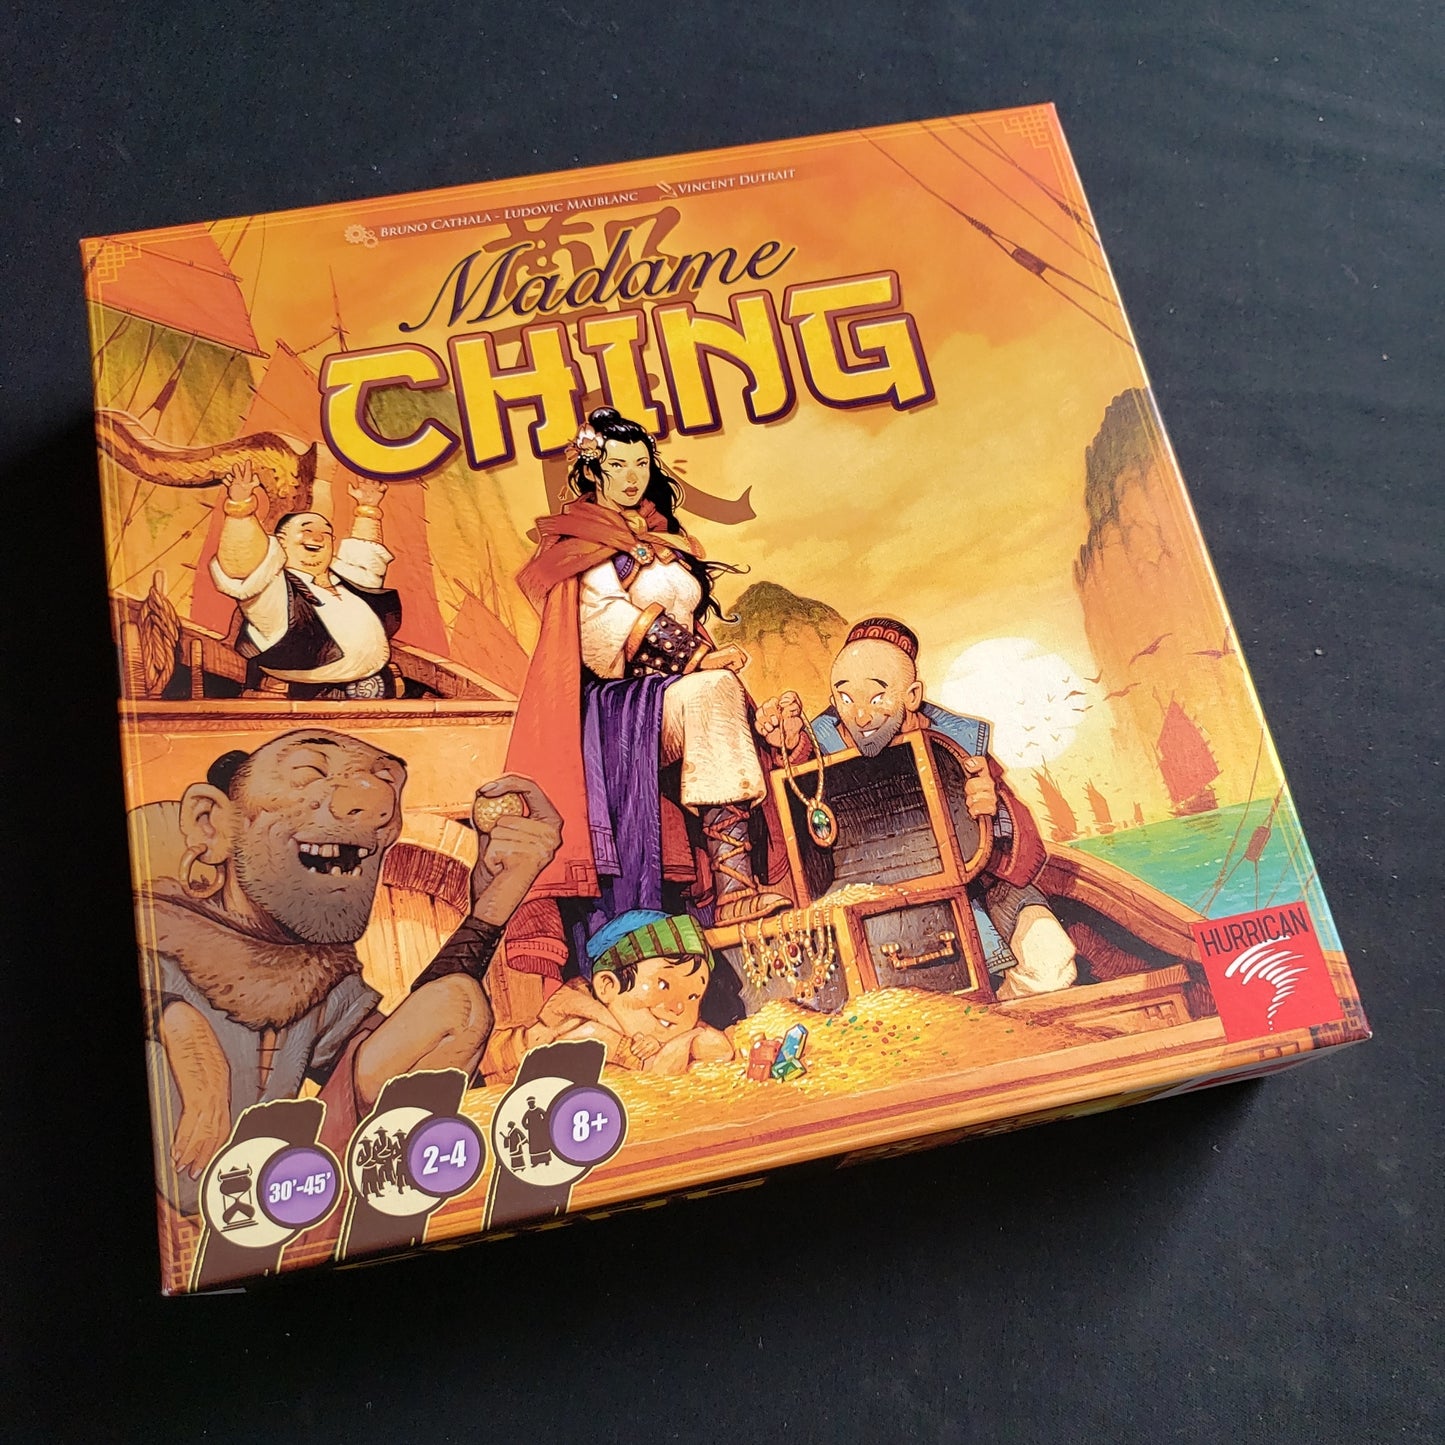 Image shows the front cover of the box of the Madame Ching board game